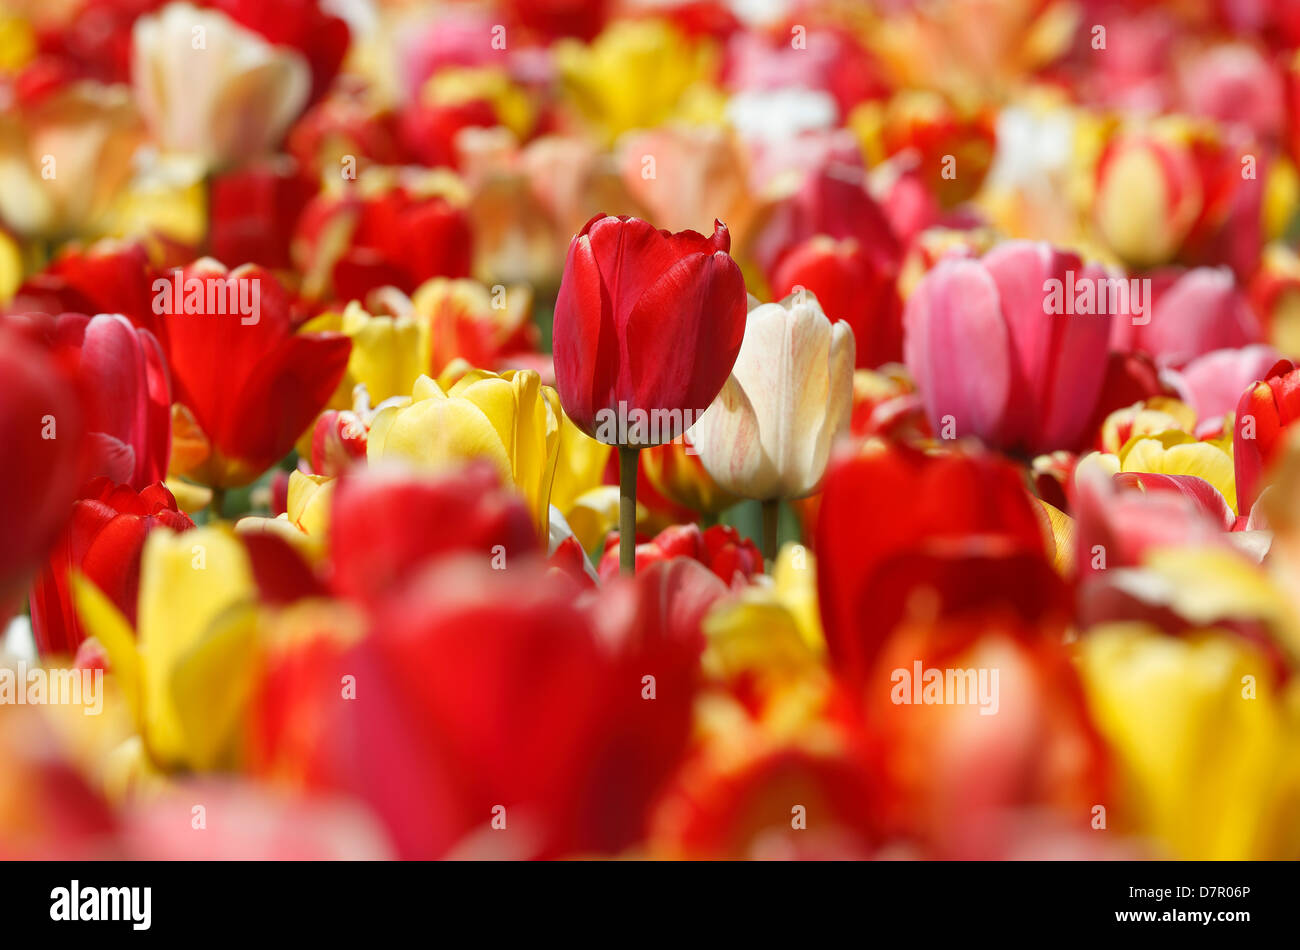 Red and yellow tulips in the Boston Public Garden Stock Photo